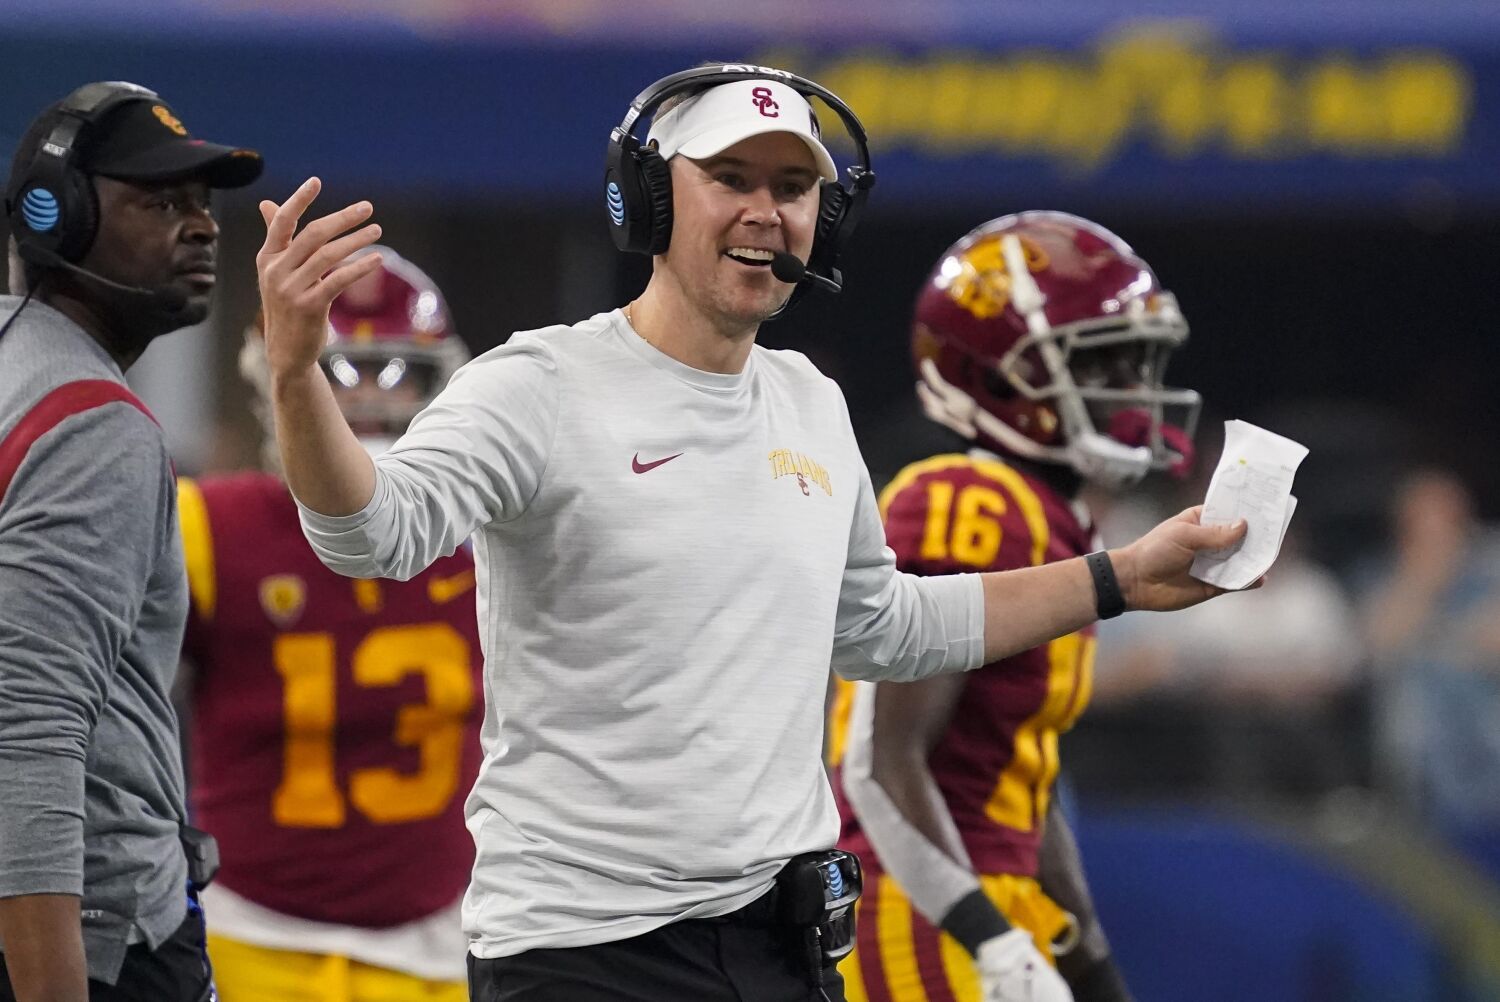 'It's gonna linger.' USC haunted by collapse to Tulane in Cotton Bowl